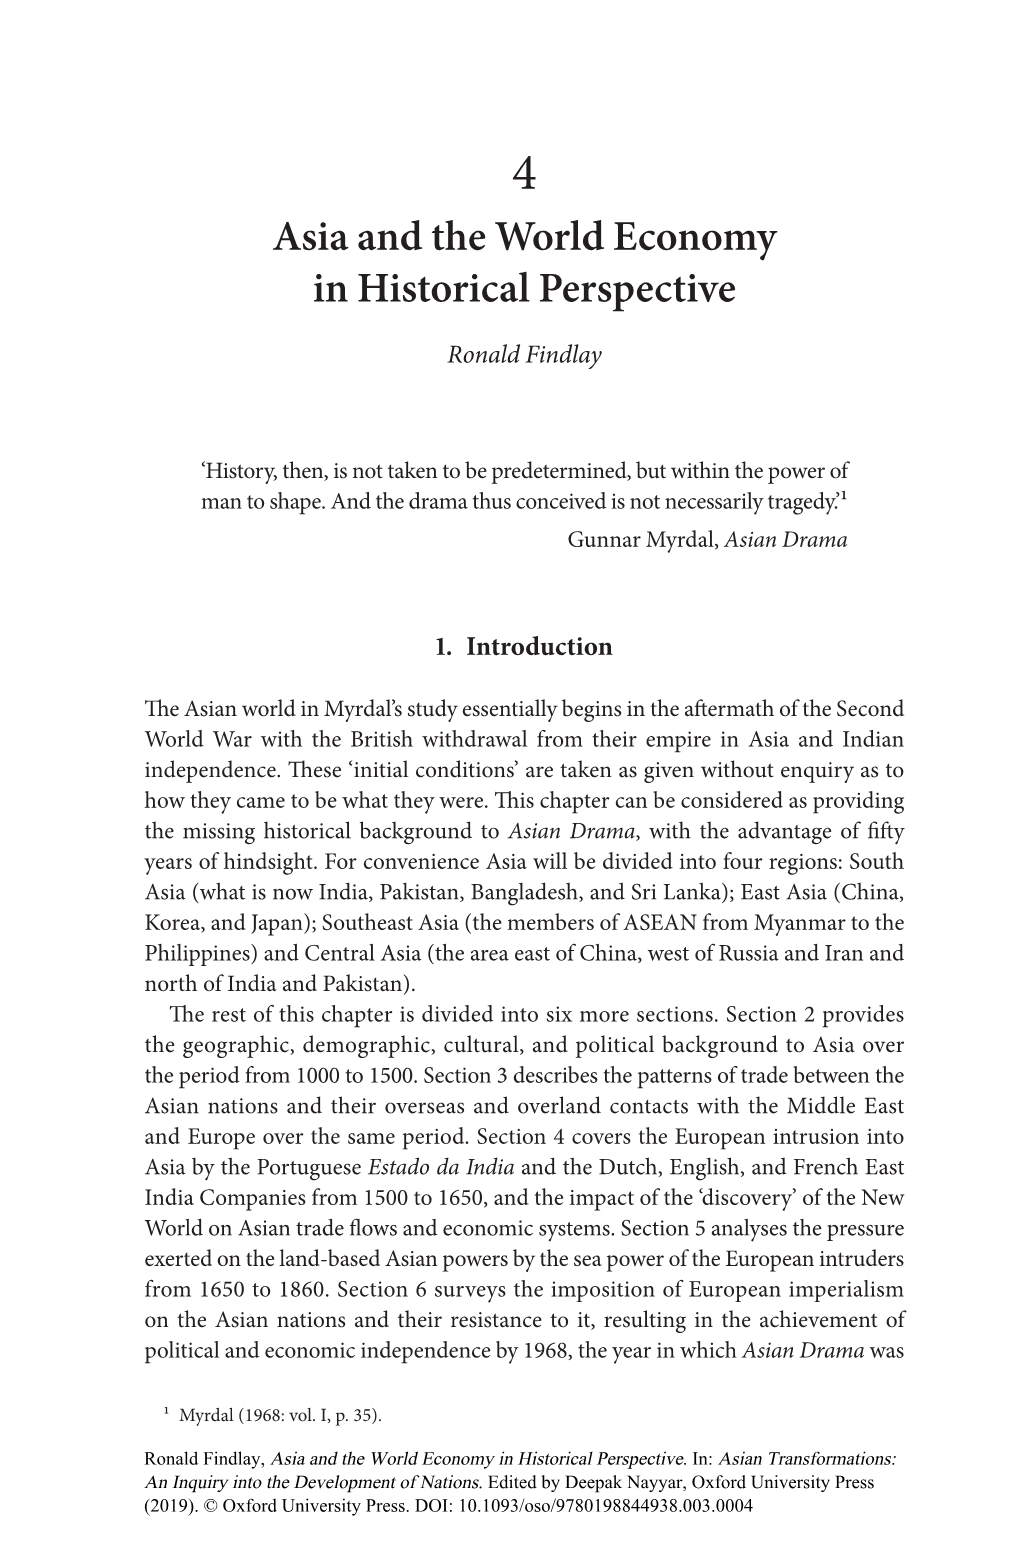 Asia and the World Economy in Historical Perspective